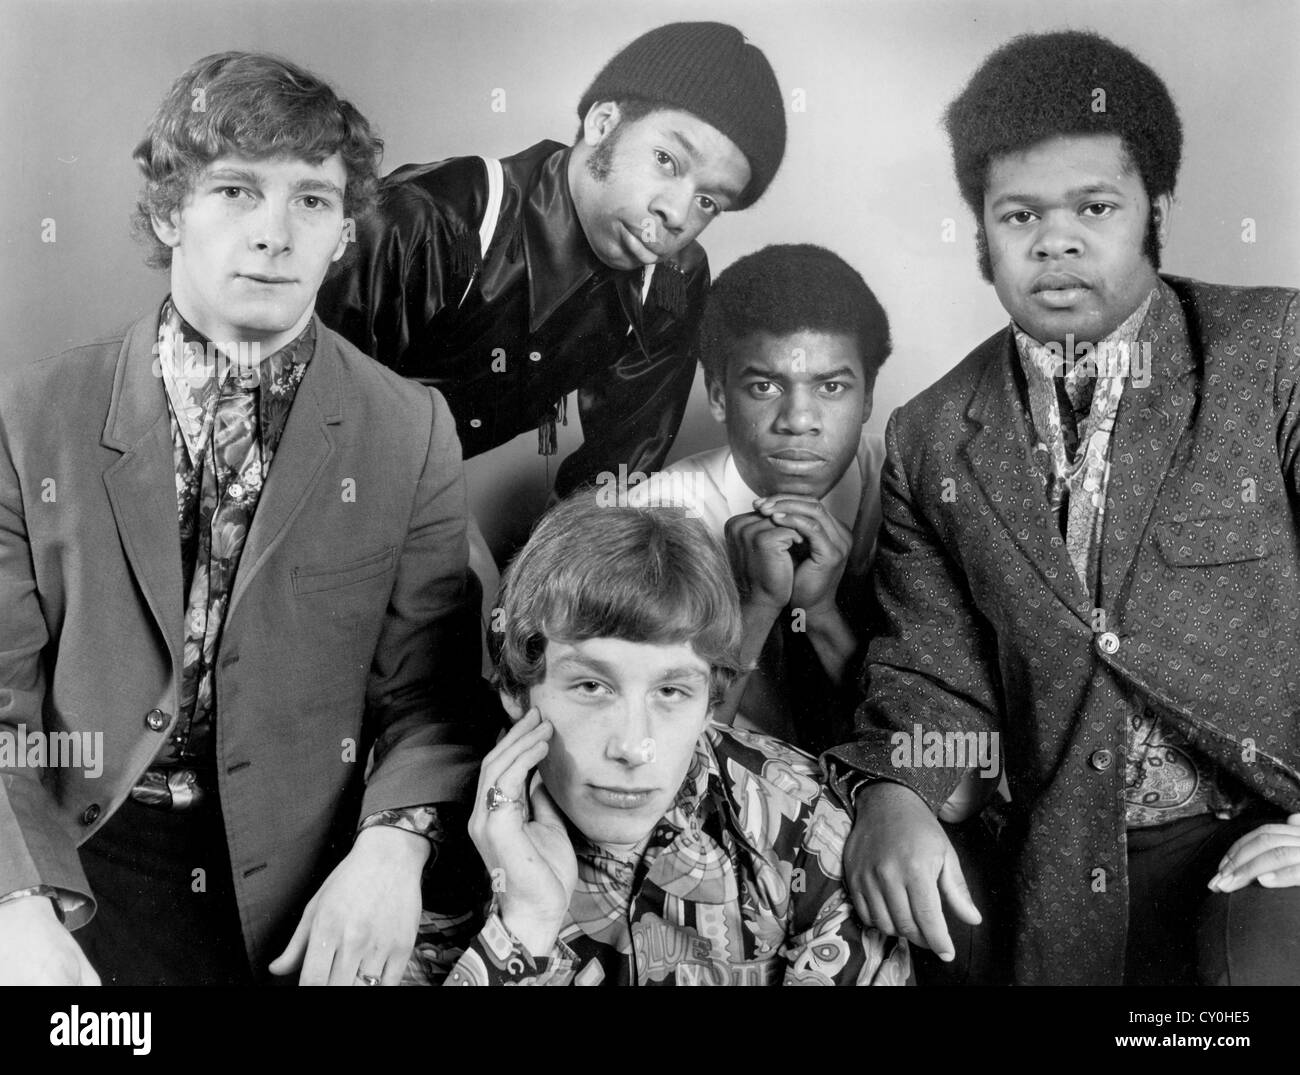 THE EQUALS UK pop group in December 1967. See Description below for names. Photo Tony Gale Stock Photo